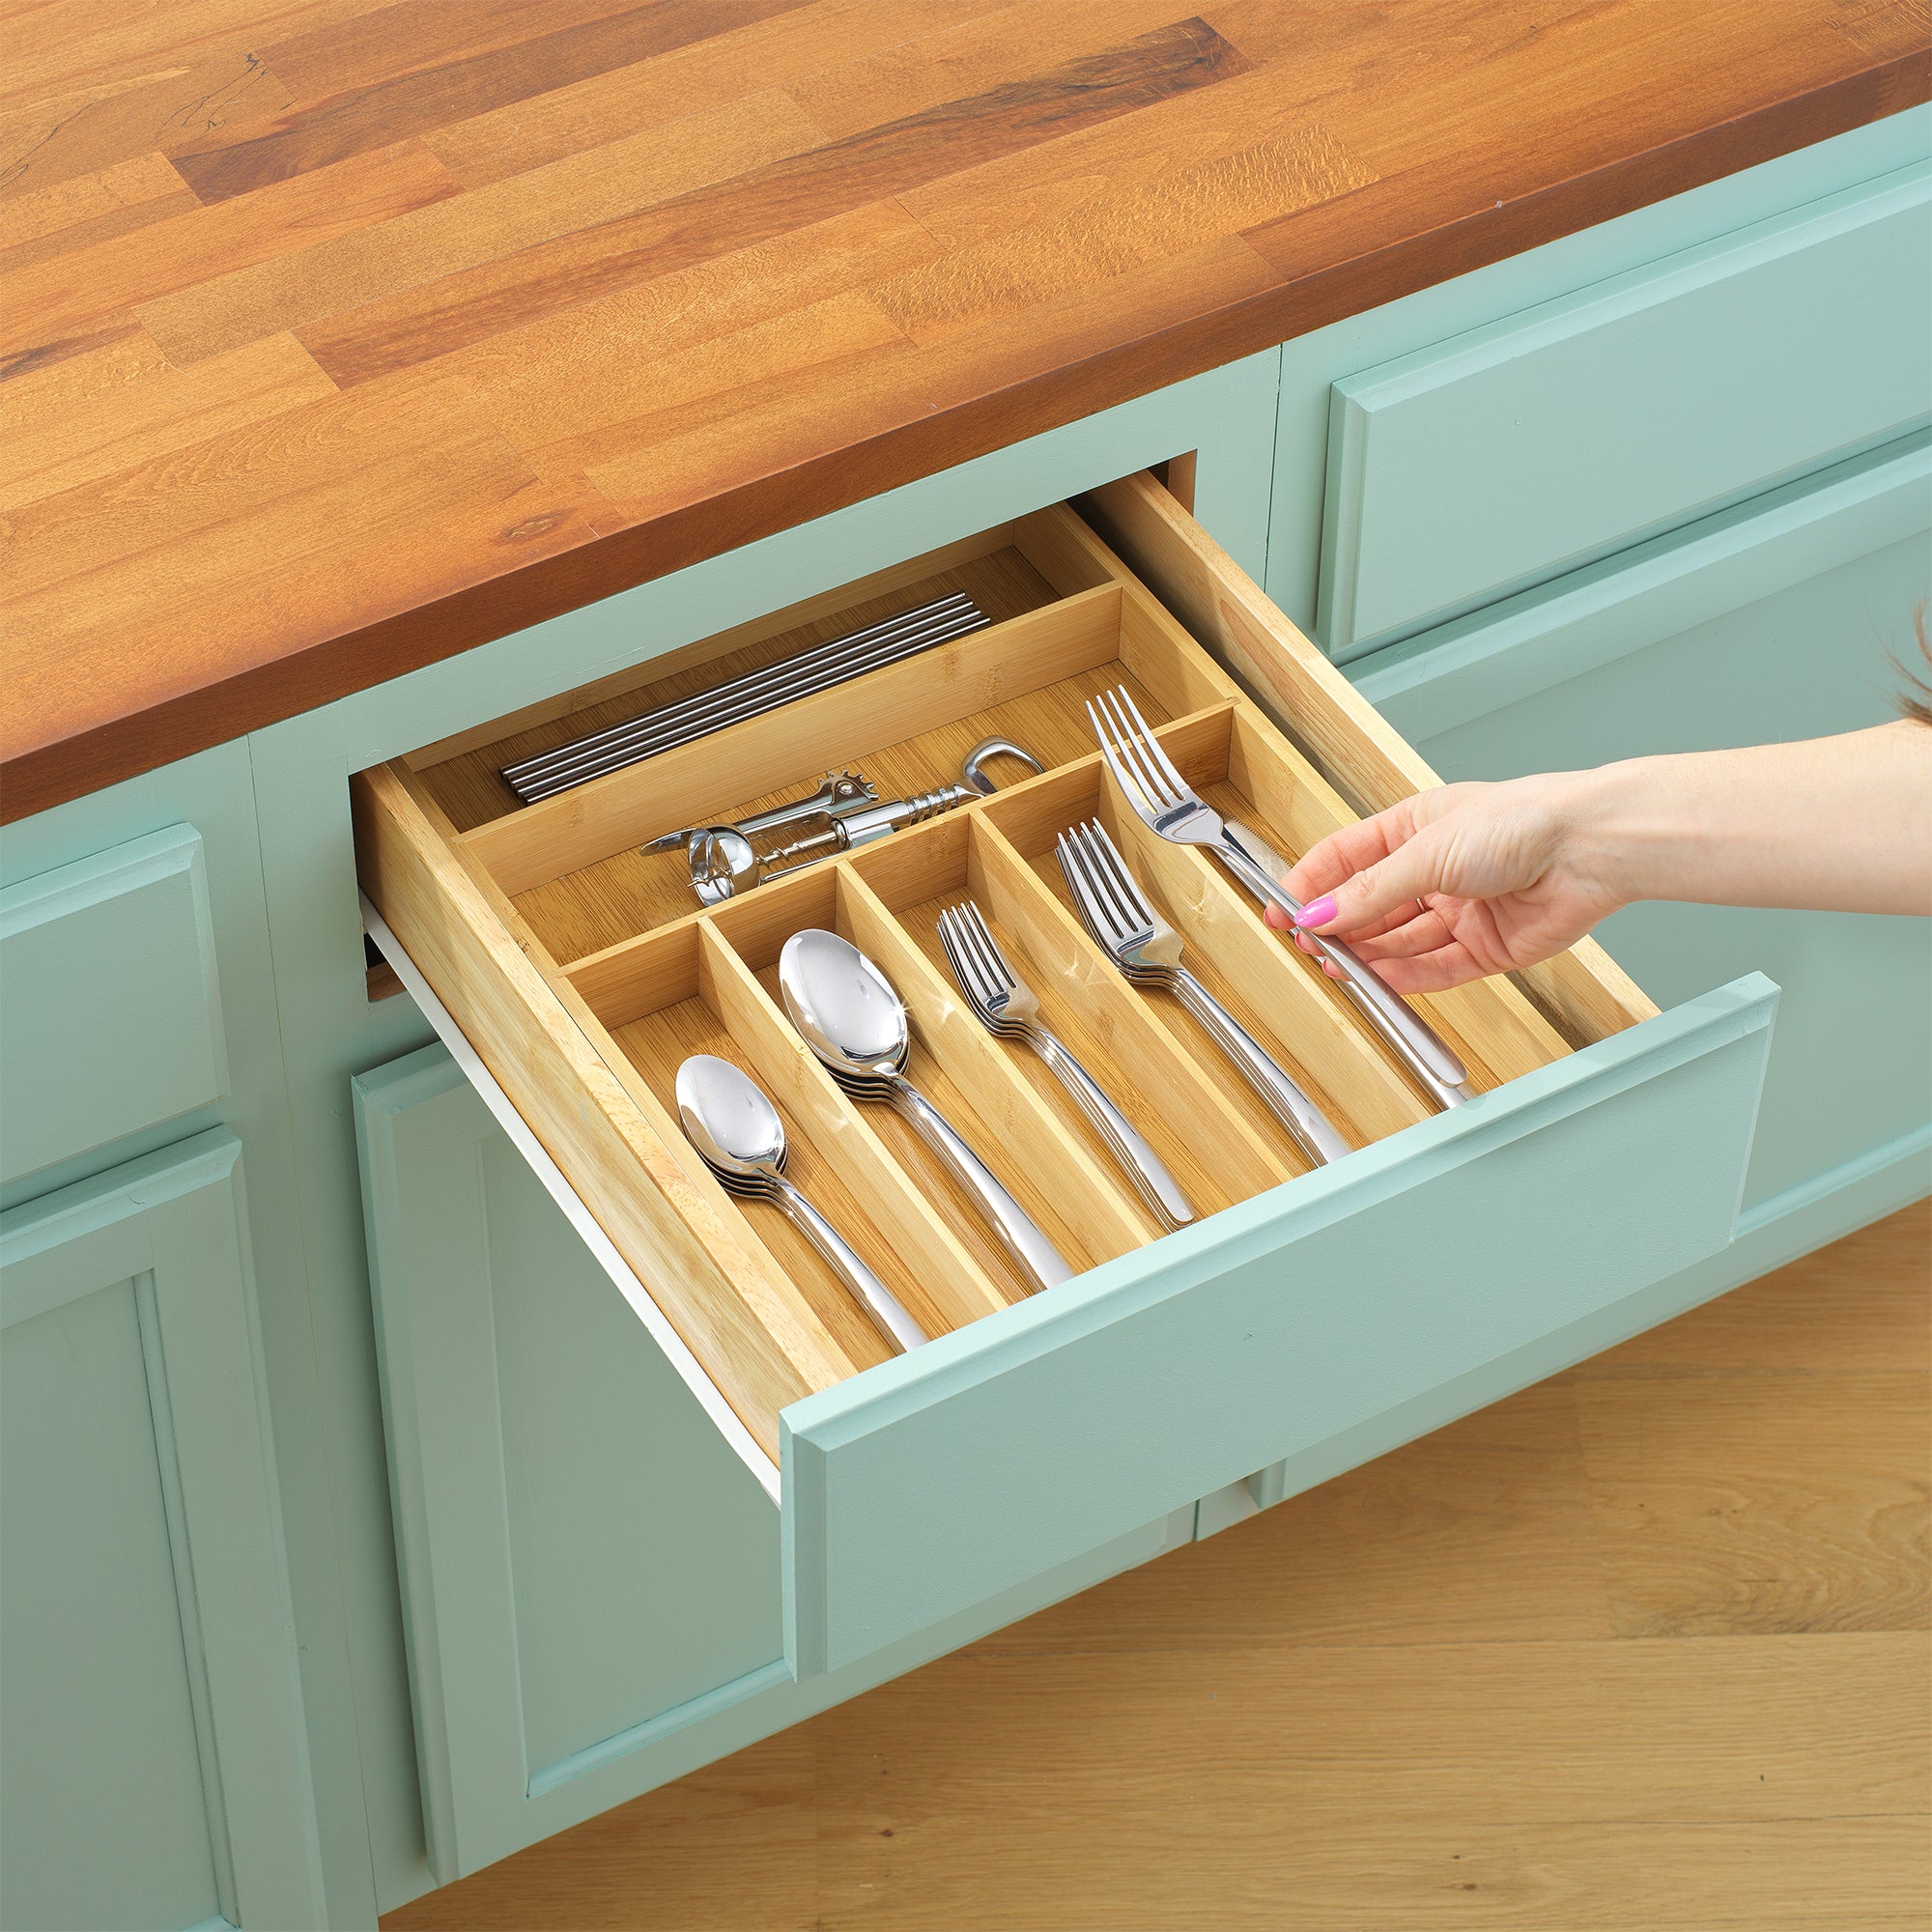 7 Compartment Bamboo Drawer Organizer